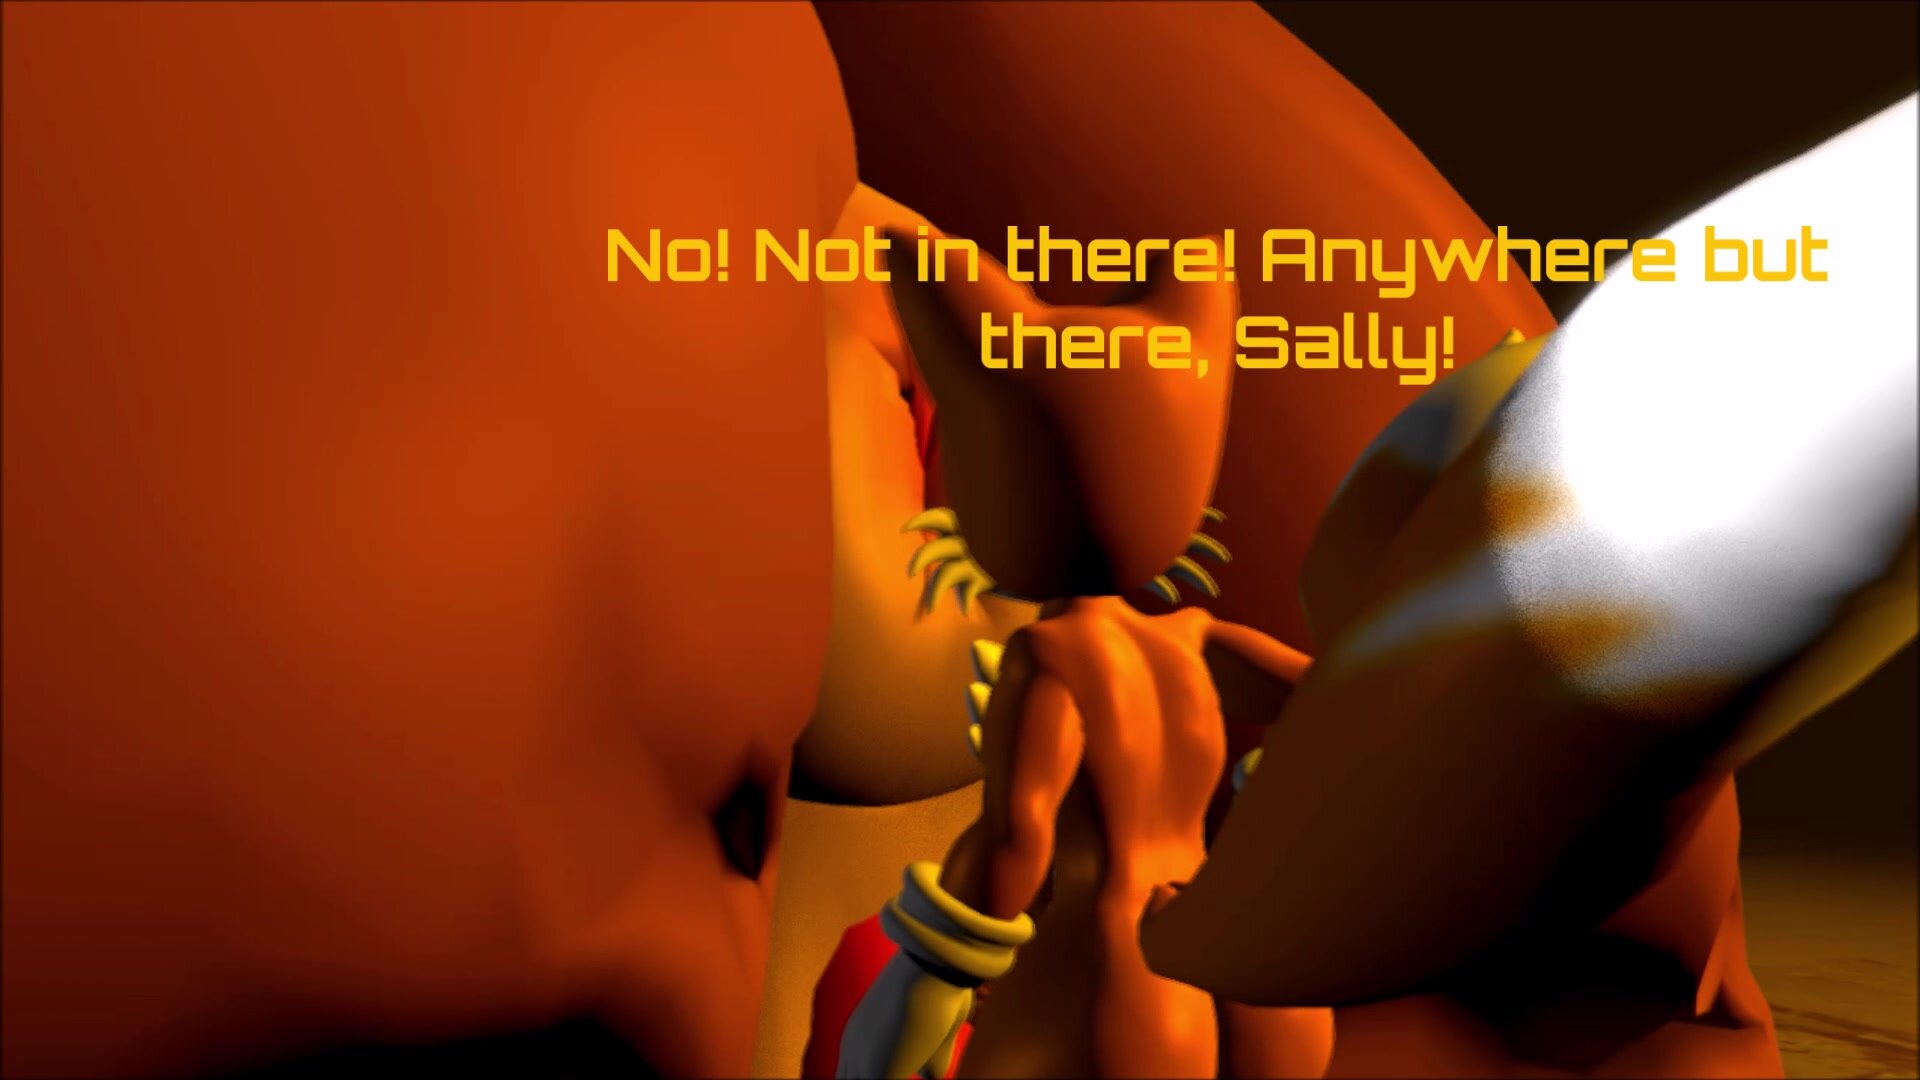 Used and Abused by her anus (Sally Acorn ANAL VORE)